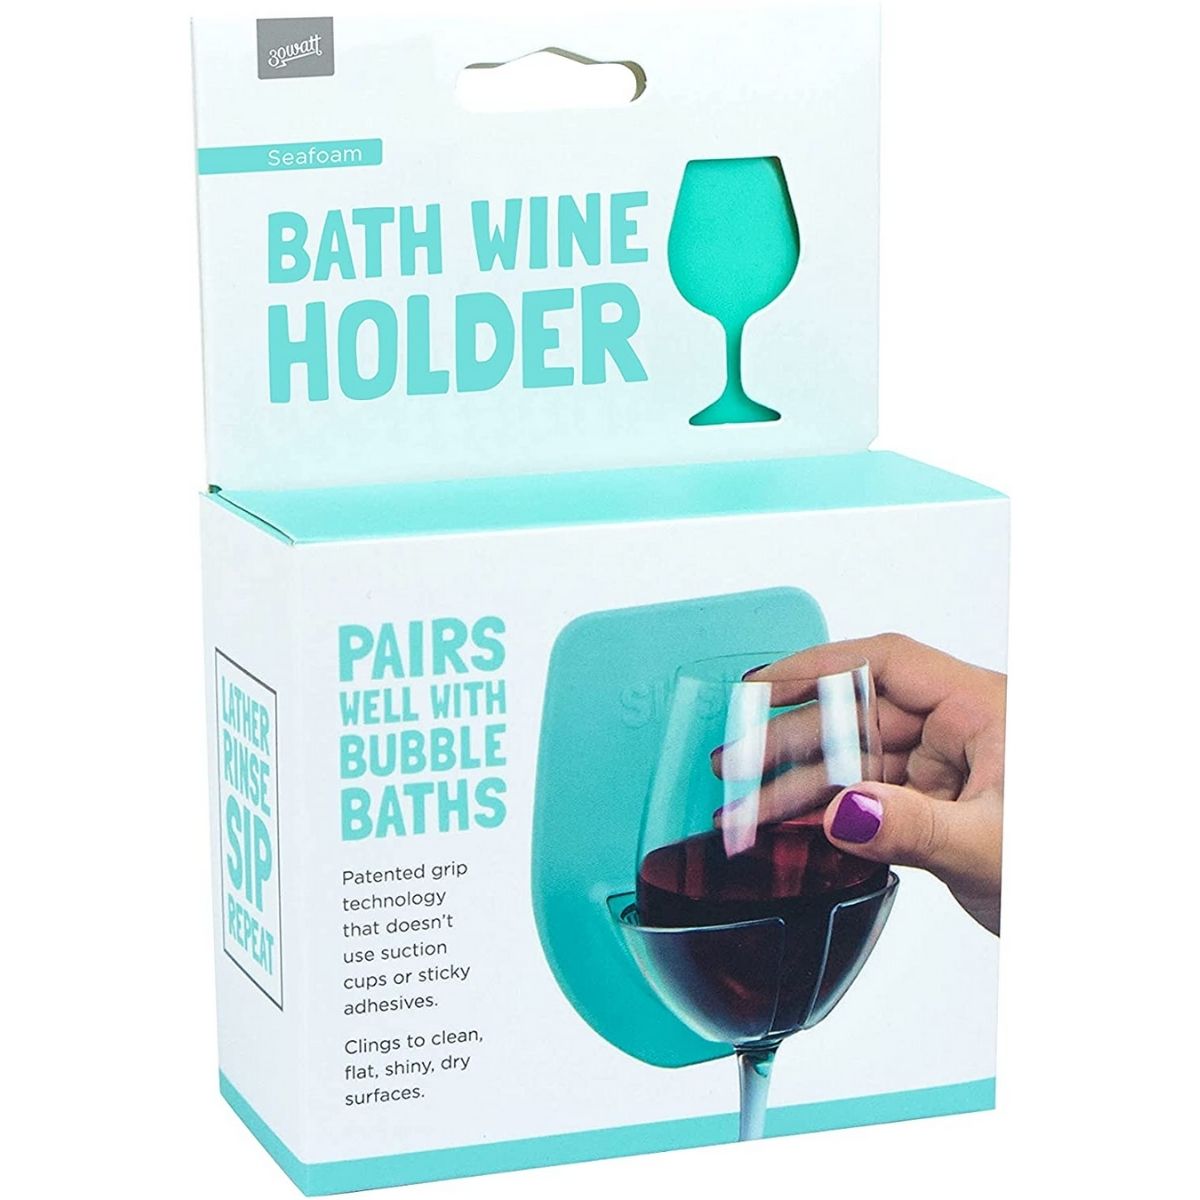 The Best Gifts for Wine Lovers Option: 30 Watt Silicone Wine Glass Holder